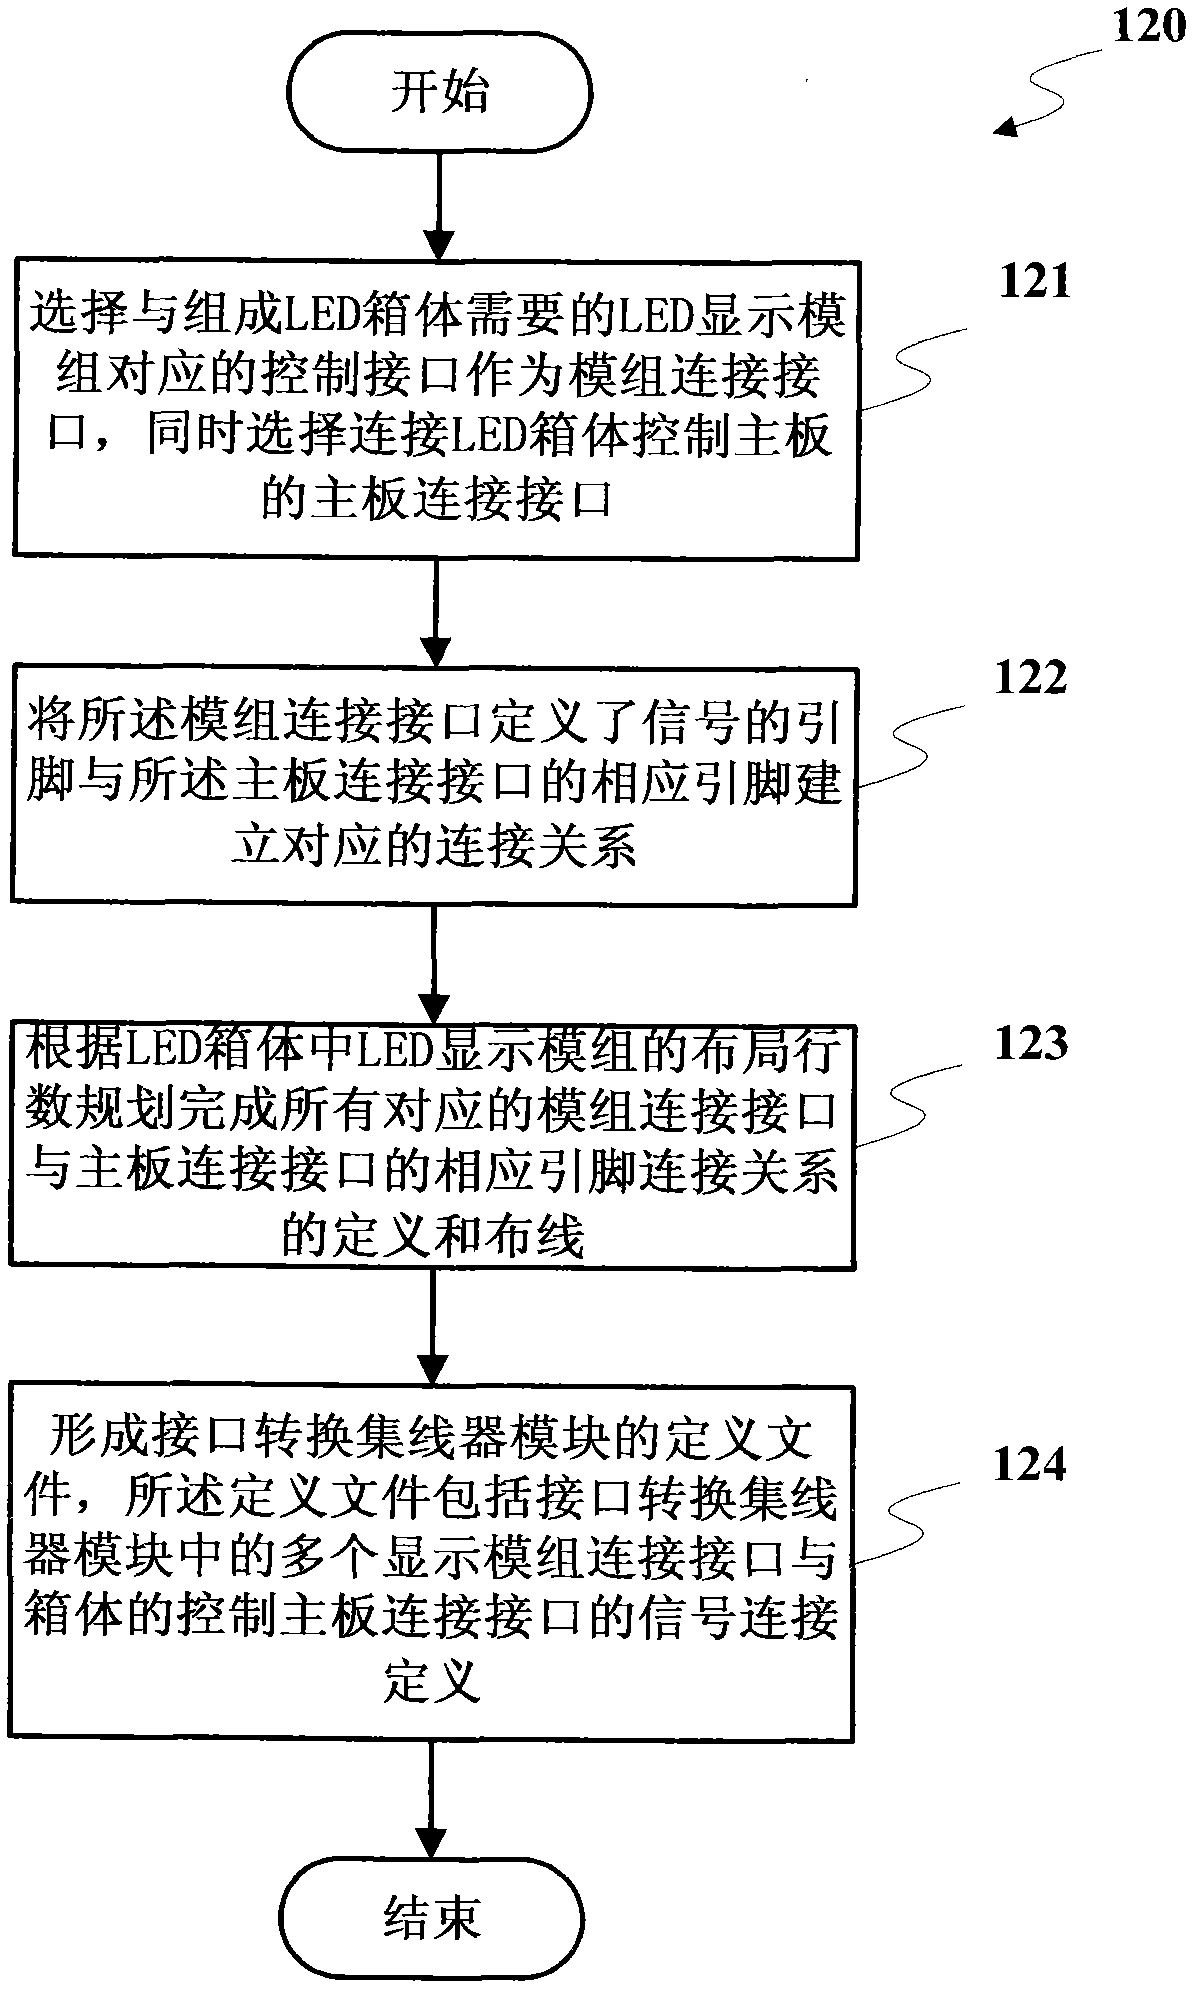 Computer-aided design method and device for large LED (light-emitting diode) screens